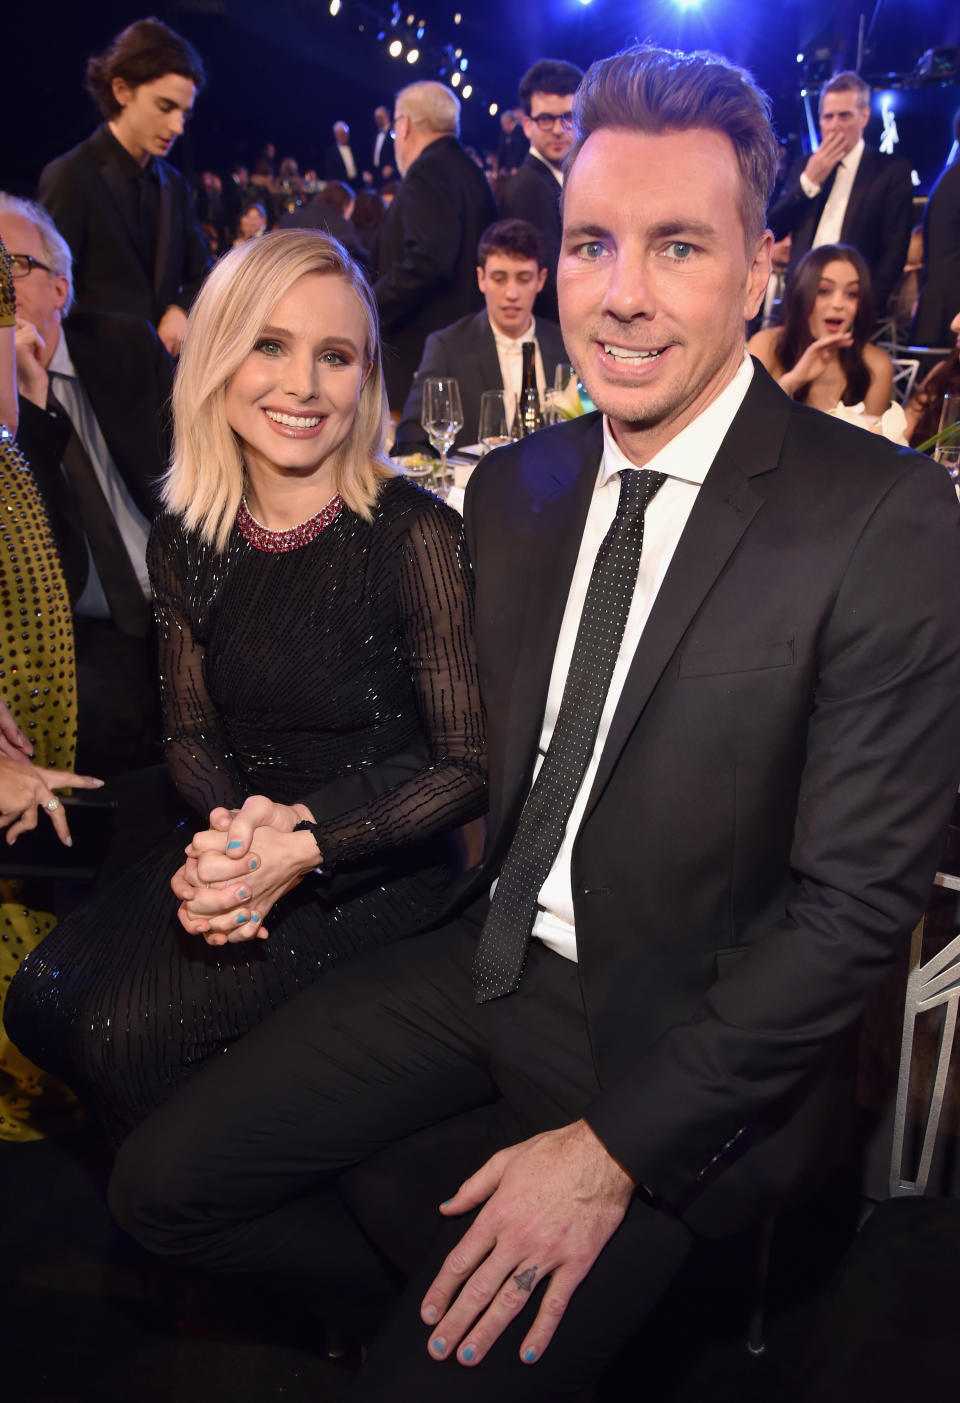 Kristen Bell and Dax Shepard hold hands at the 24th Annual Screen Actors Guild Awards on January 21, 2018